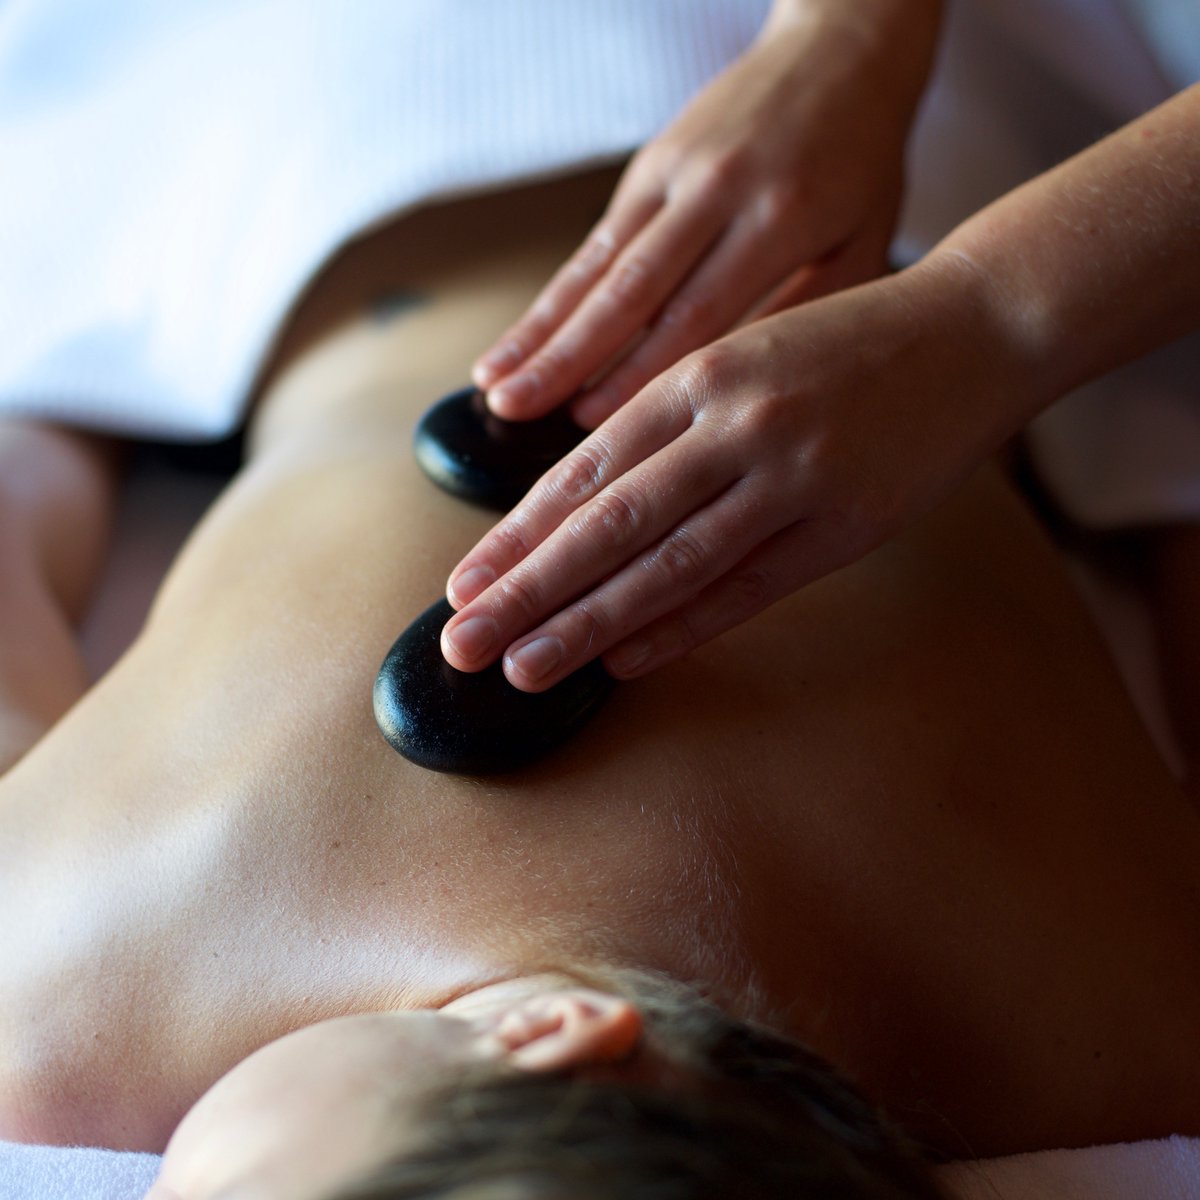 Warm up this winter with our Rocks of the Mediterranean hot stone massage ♨️ We massage warm basalt stones to relax and soothe muscles and rebalance your harmony using your body’s energy points. £100 for 55 minutes – call 017687 88900 to book today.